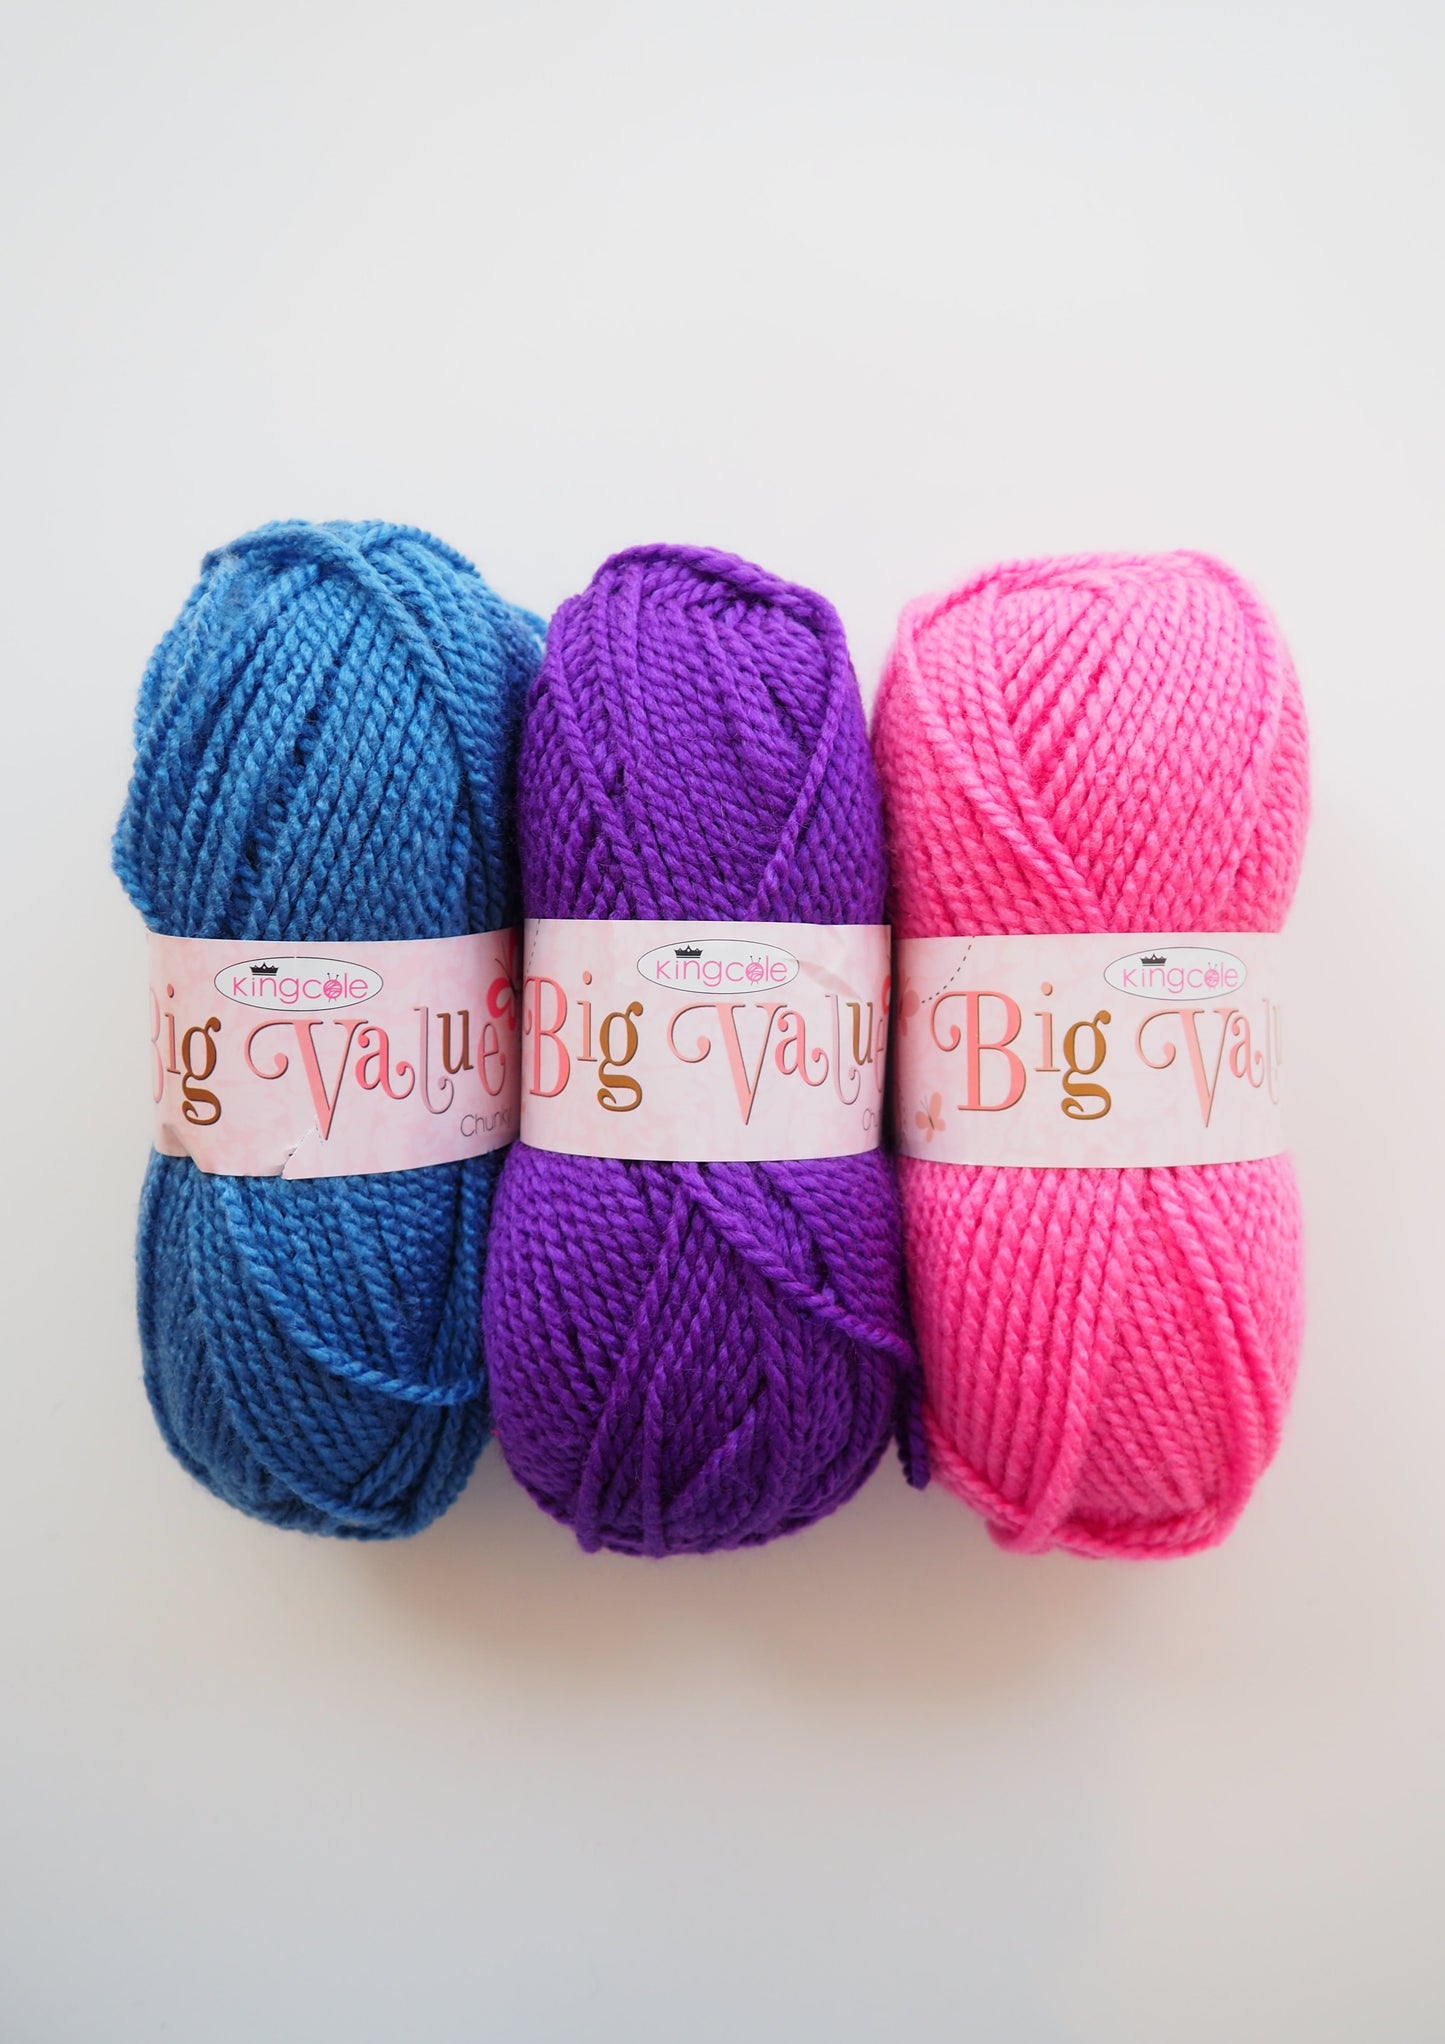 Three balls of King Cole Yarns Big Value Chunky: one in a vibrant blue color, another in a lovely pink shade, and the third in a captivating purple hue.